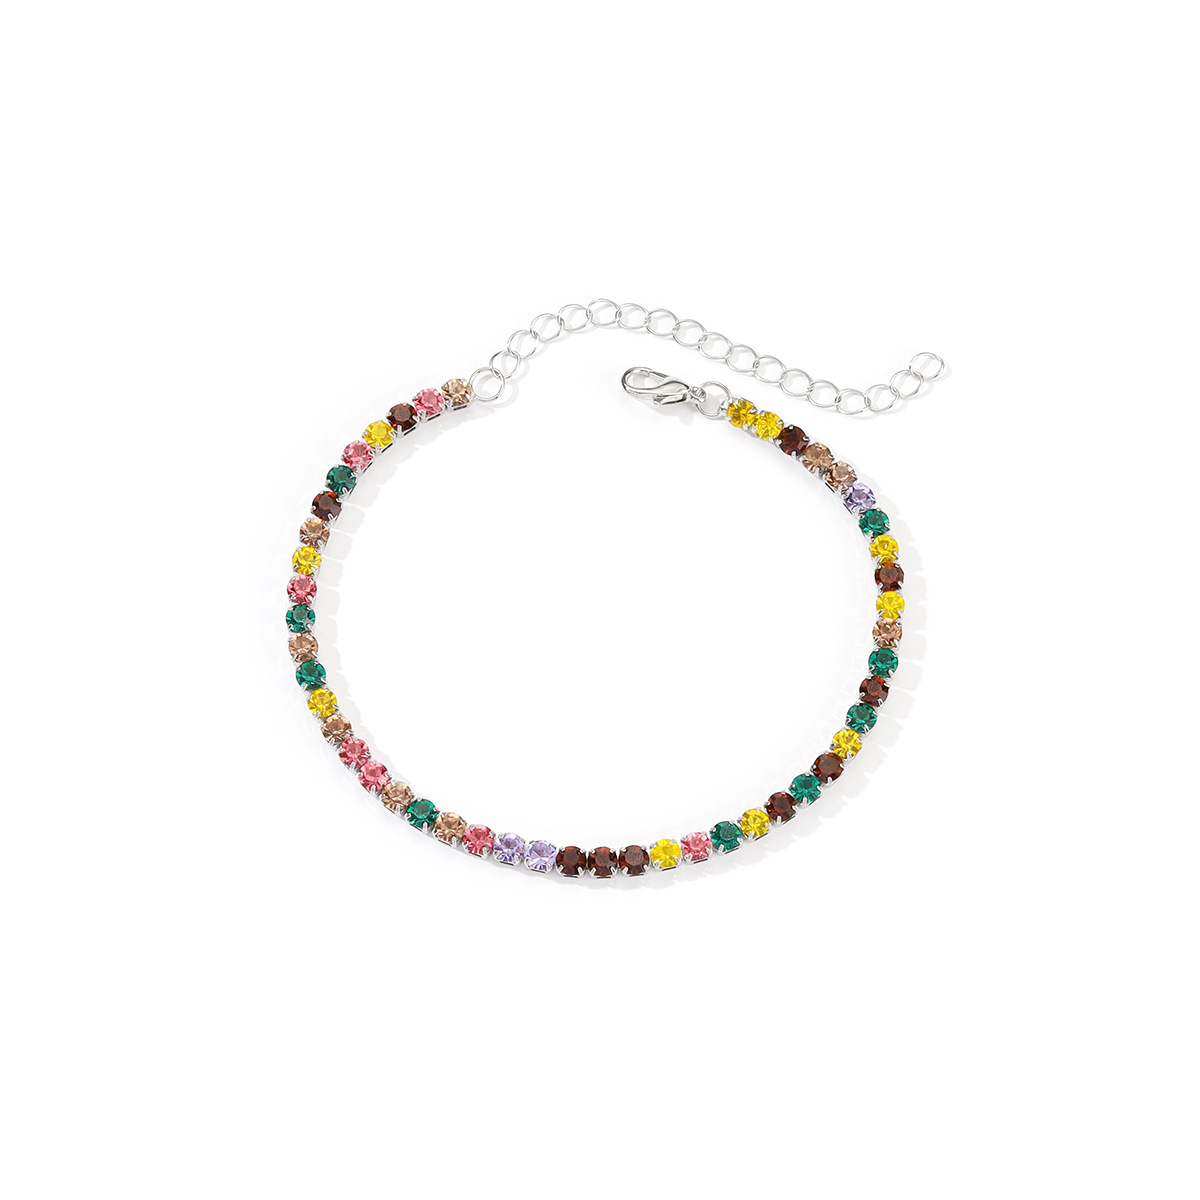 Colorful silver anklet